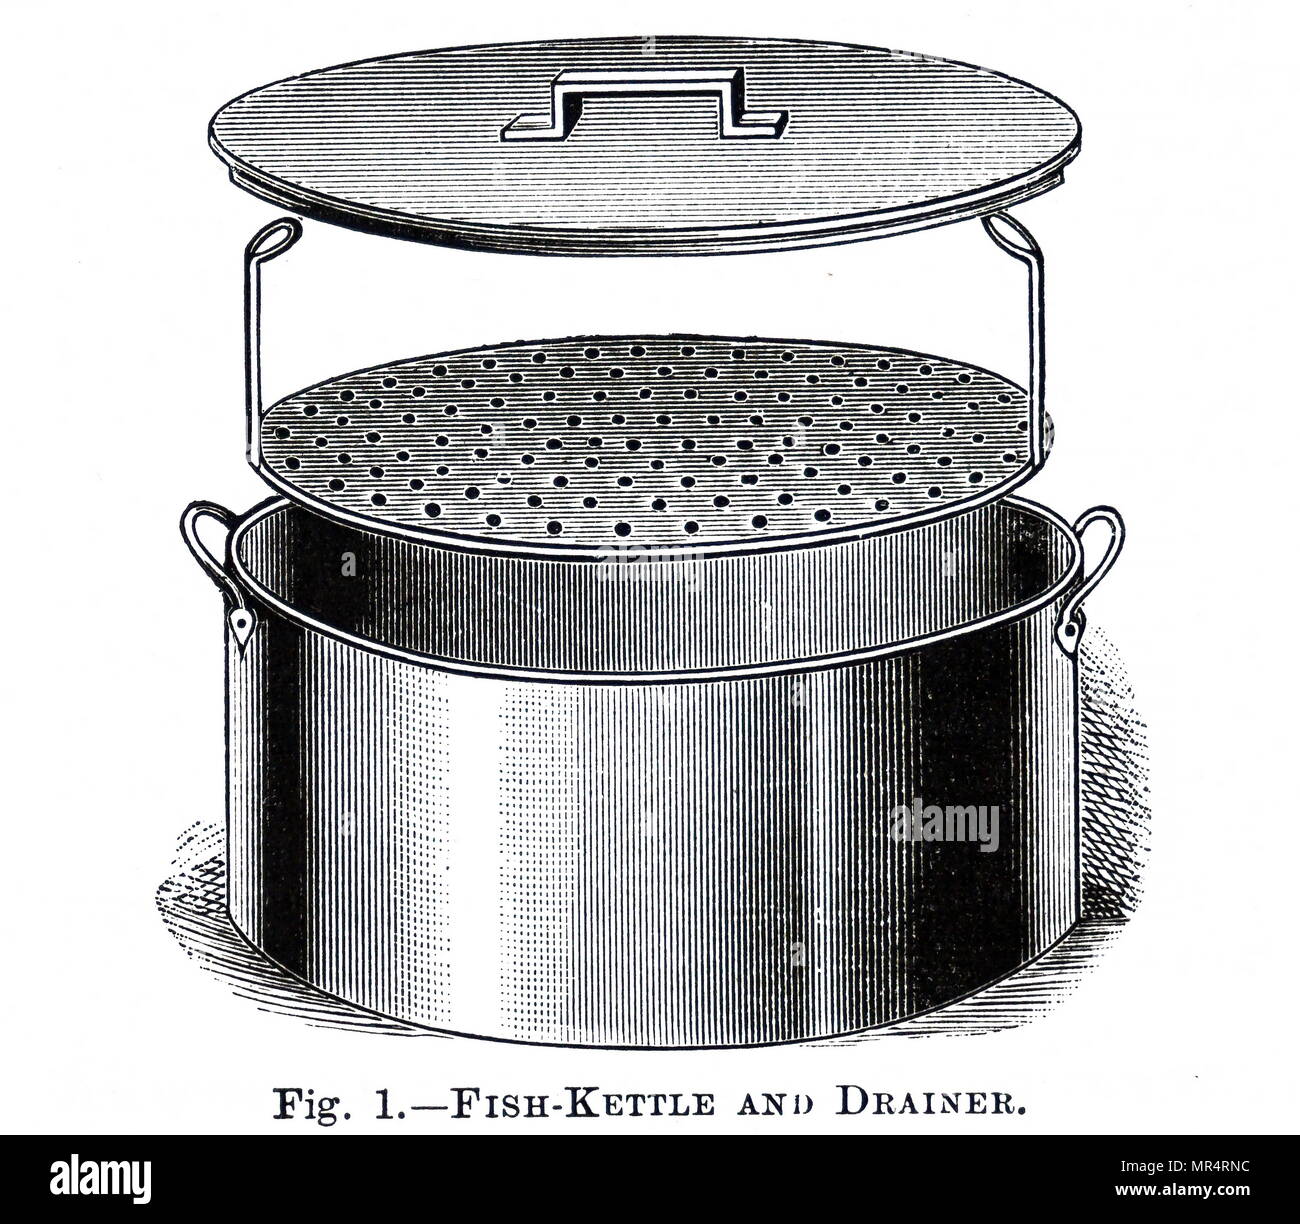 Cooking Pots Dimensions & Drawings